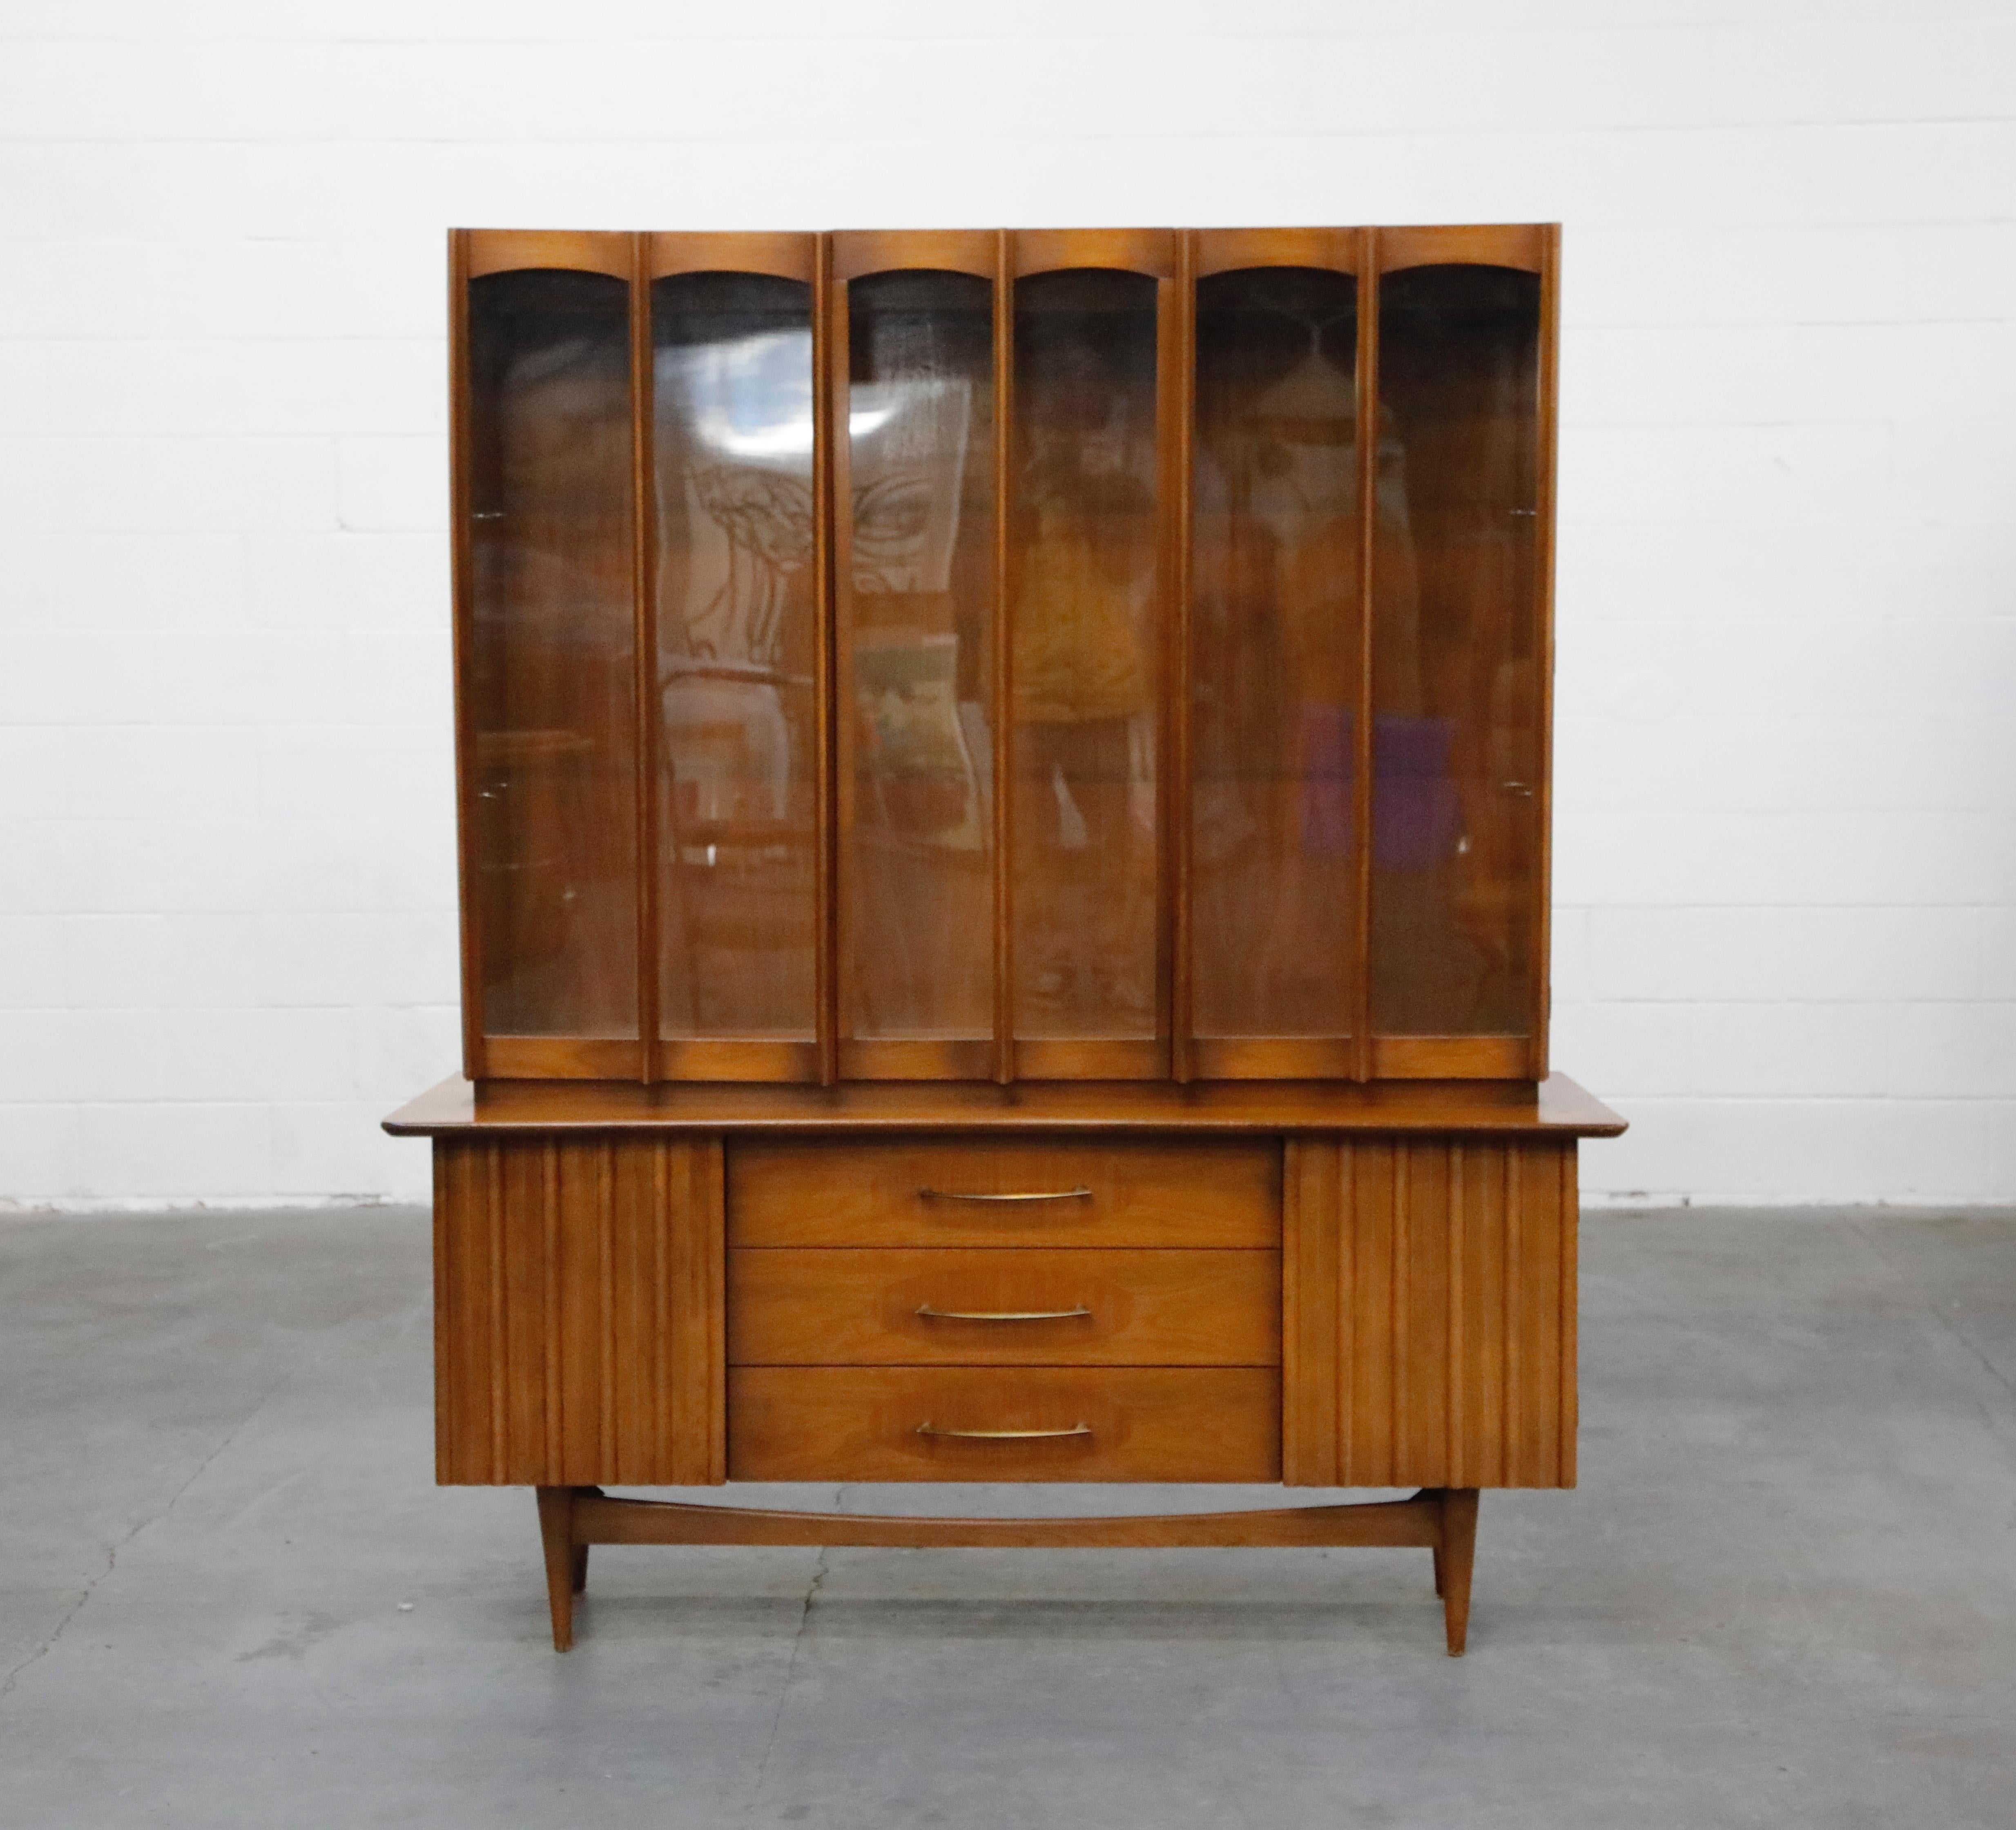 This large Brasilia styled American Modern sideboard credenza and hutch wall unit has beautiful midcentury details adorning its exterior and ample storage inside. The top china cabinet has two doors of glass and Brasilia styled slatted wood panels